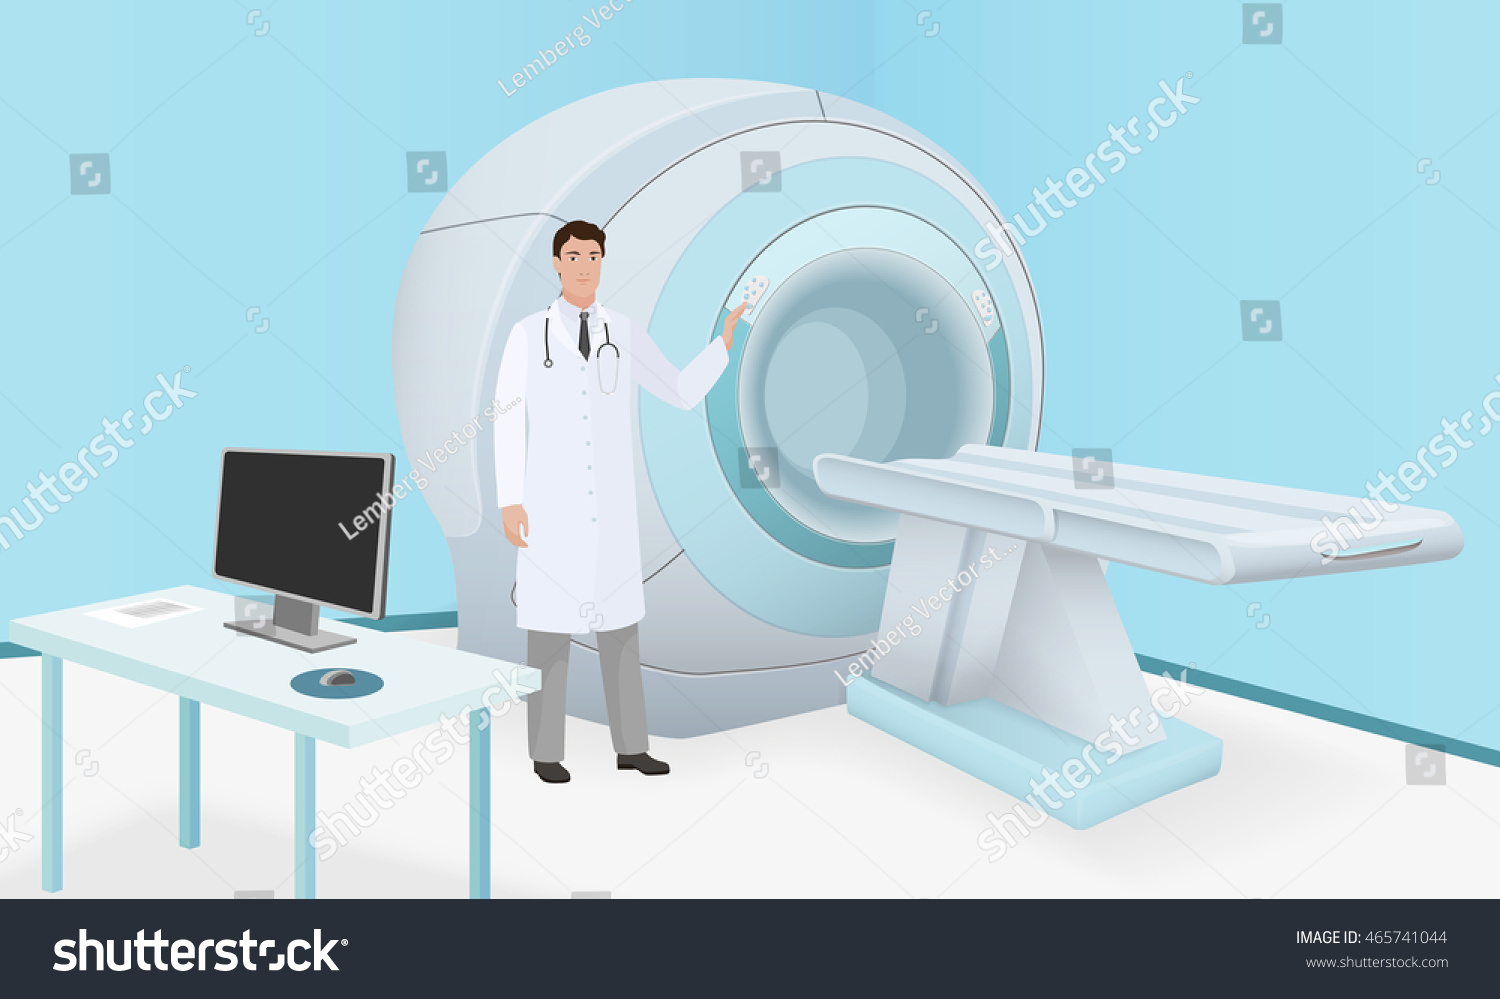 SVG of Doctor invites patient to body brain scan of MRI machine. MRI scan and diagnostics process in procedure room. Realistic vector svg